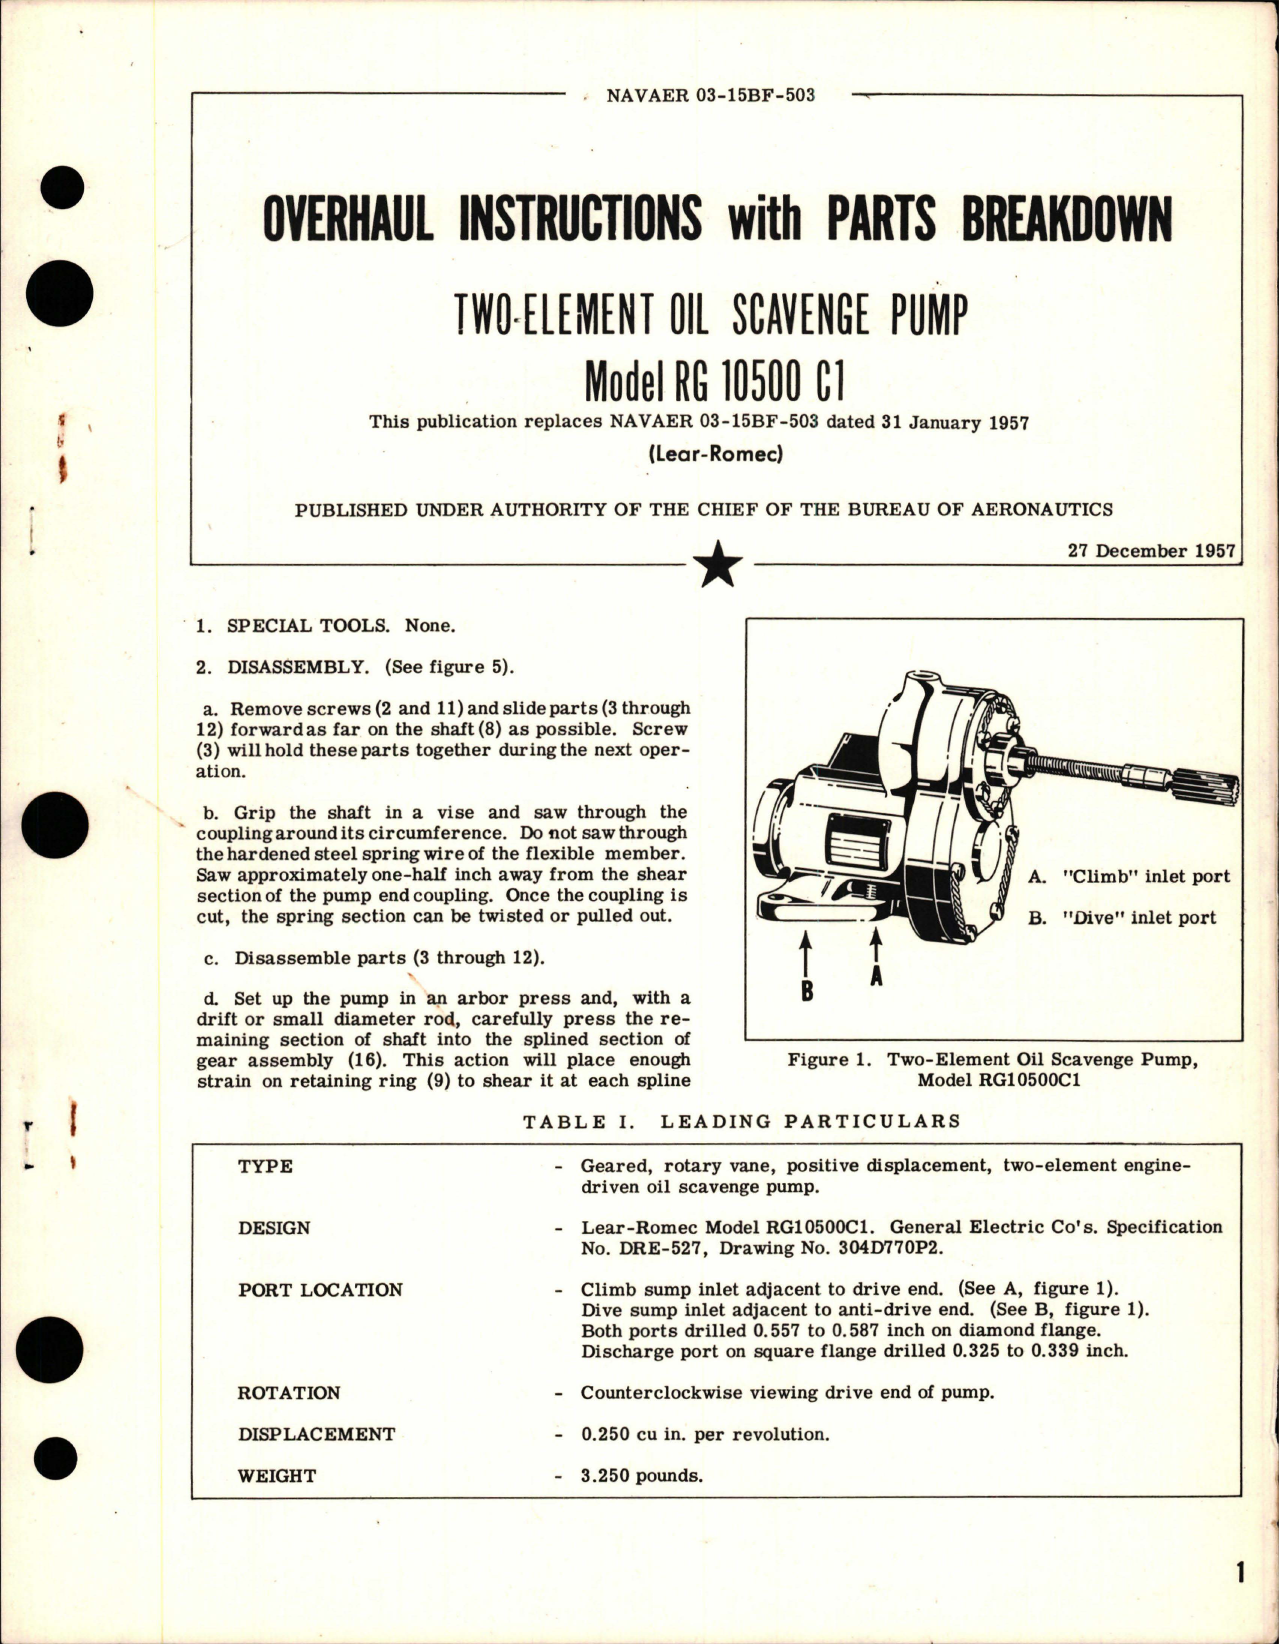 Sample page 1 from AirCorps Library document: Overhaul Instructions with Parts for Two Element Oil Scavenge Pump - Model RG10500 C1